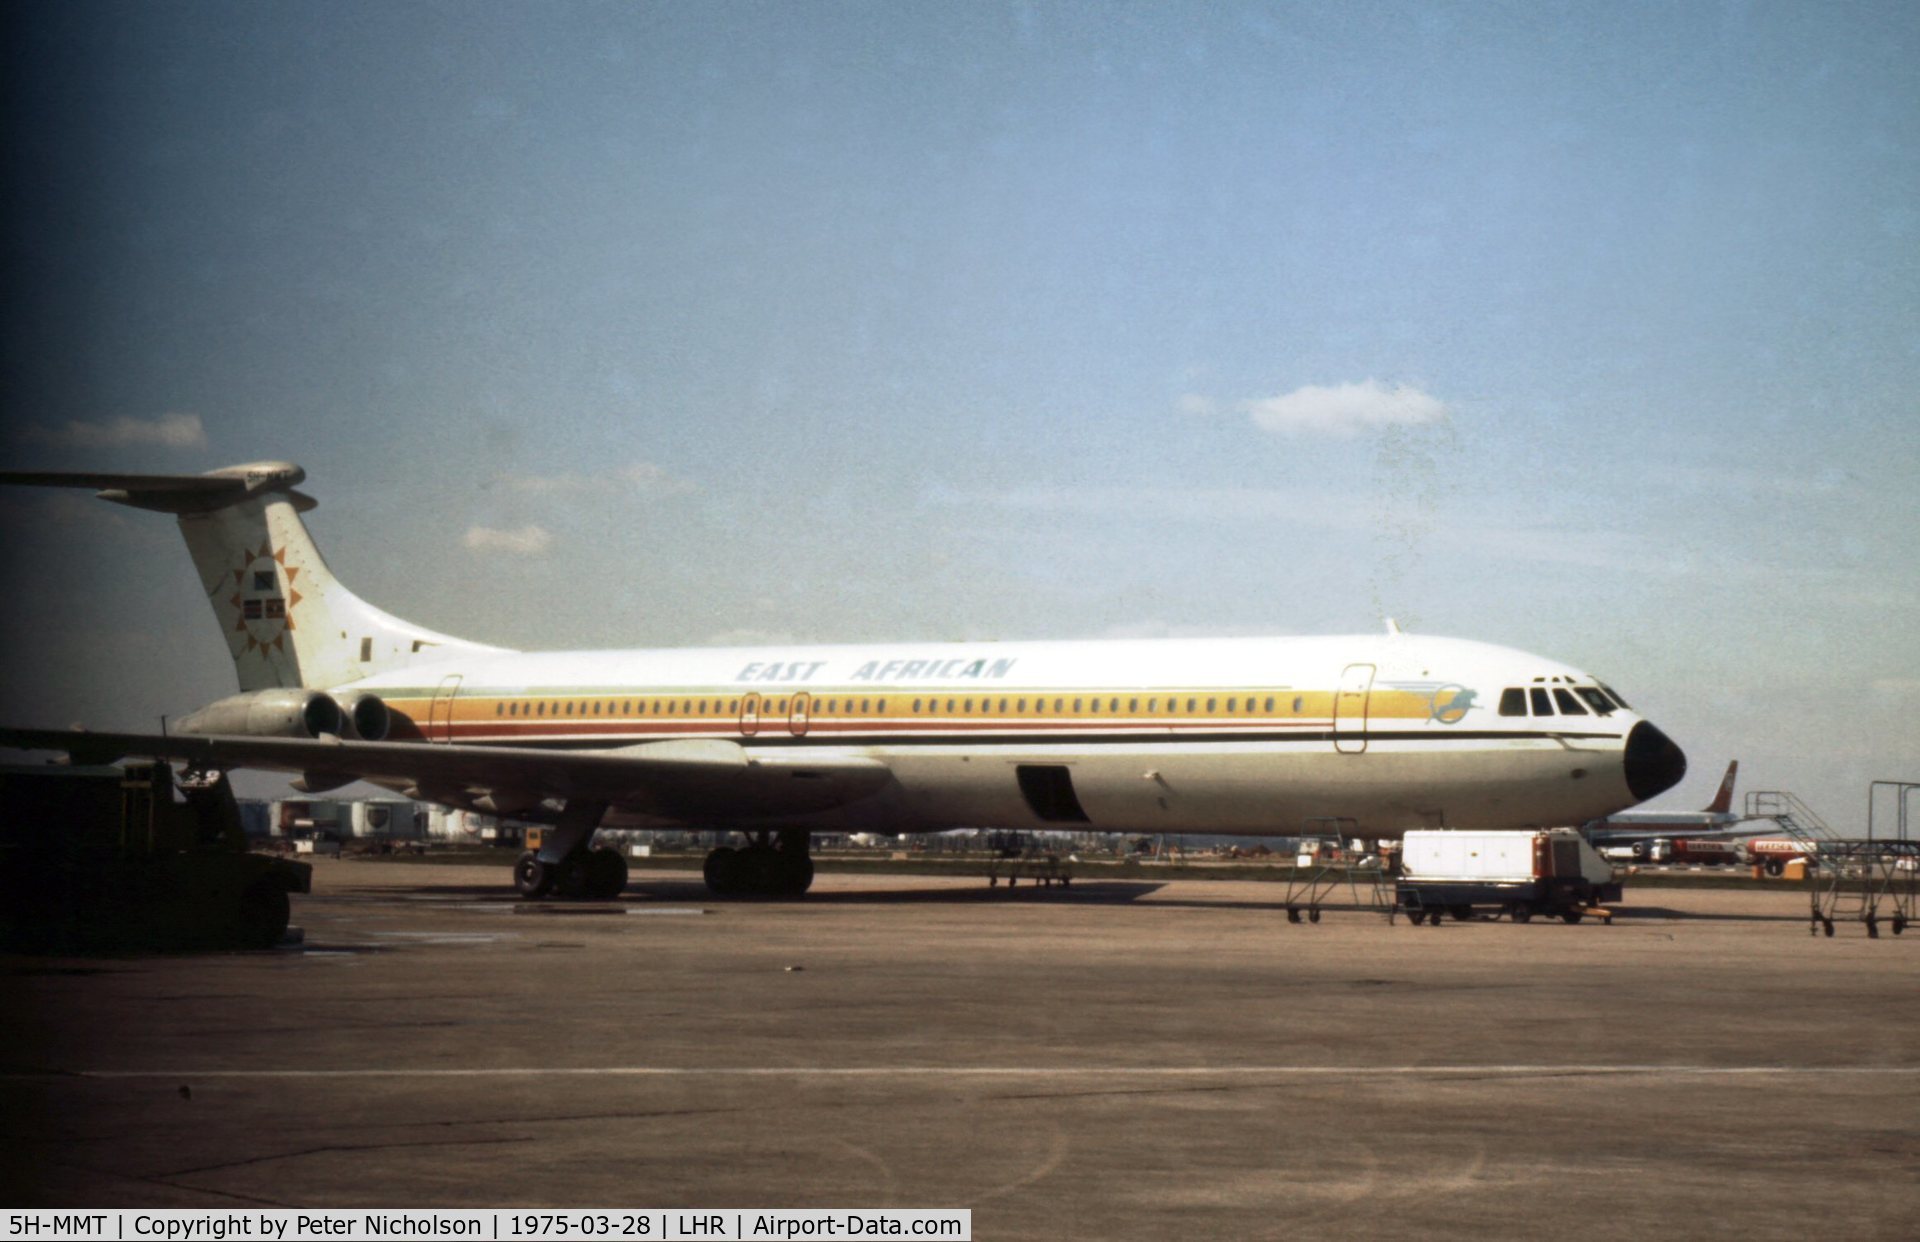 5H-MMT, 1966 Vickers Super VC10 Srs 1154 C/N 882, Super VC.10 of East African Airways at Heathrow in the Spring of 1975.